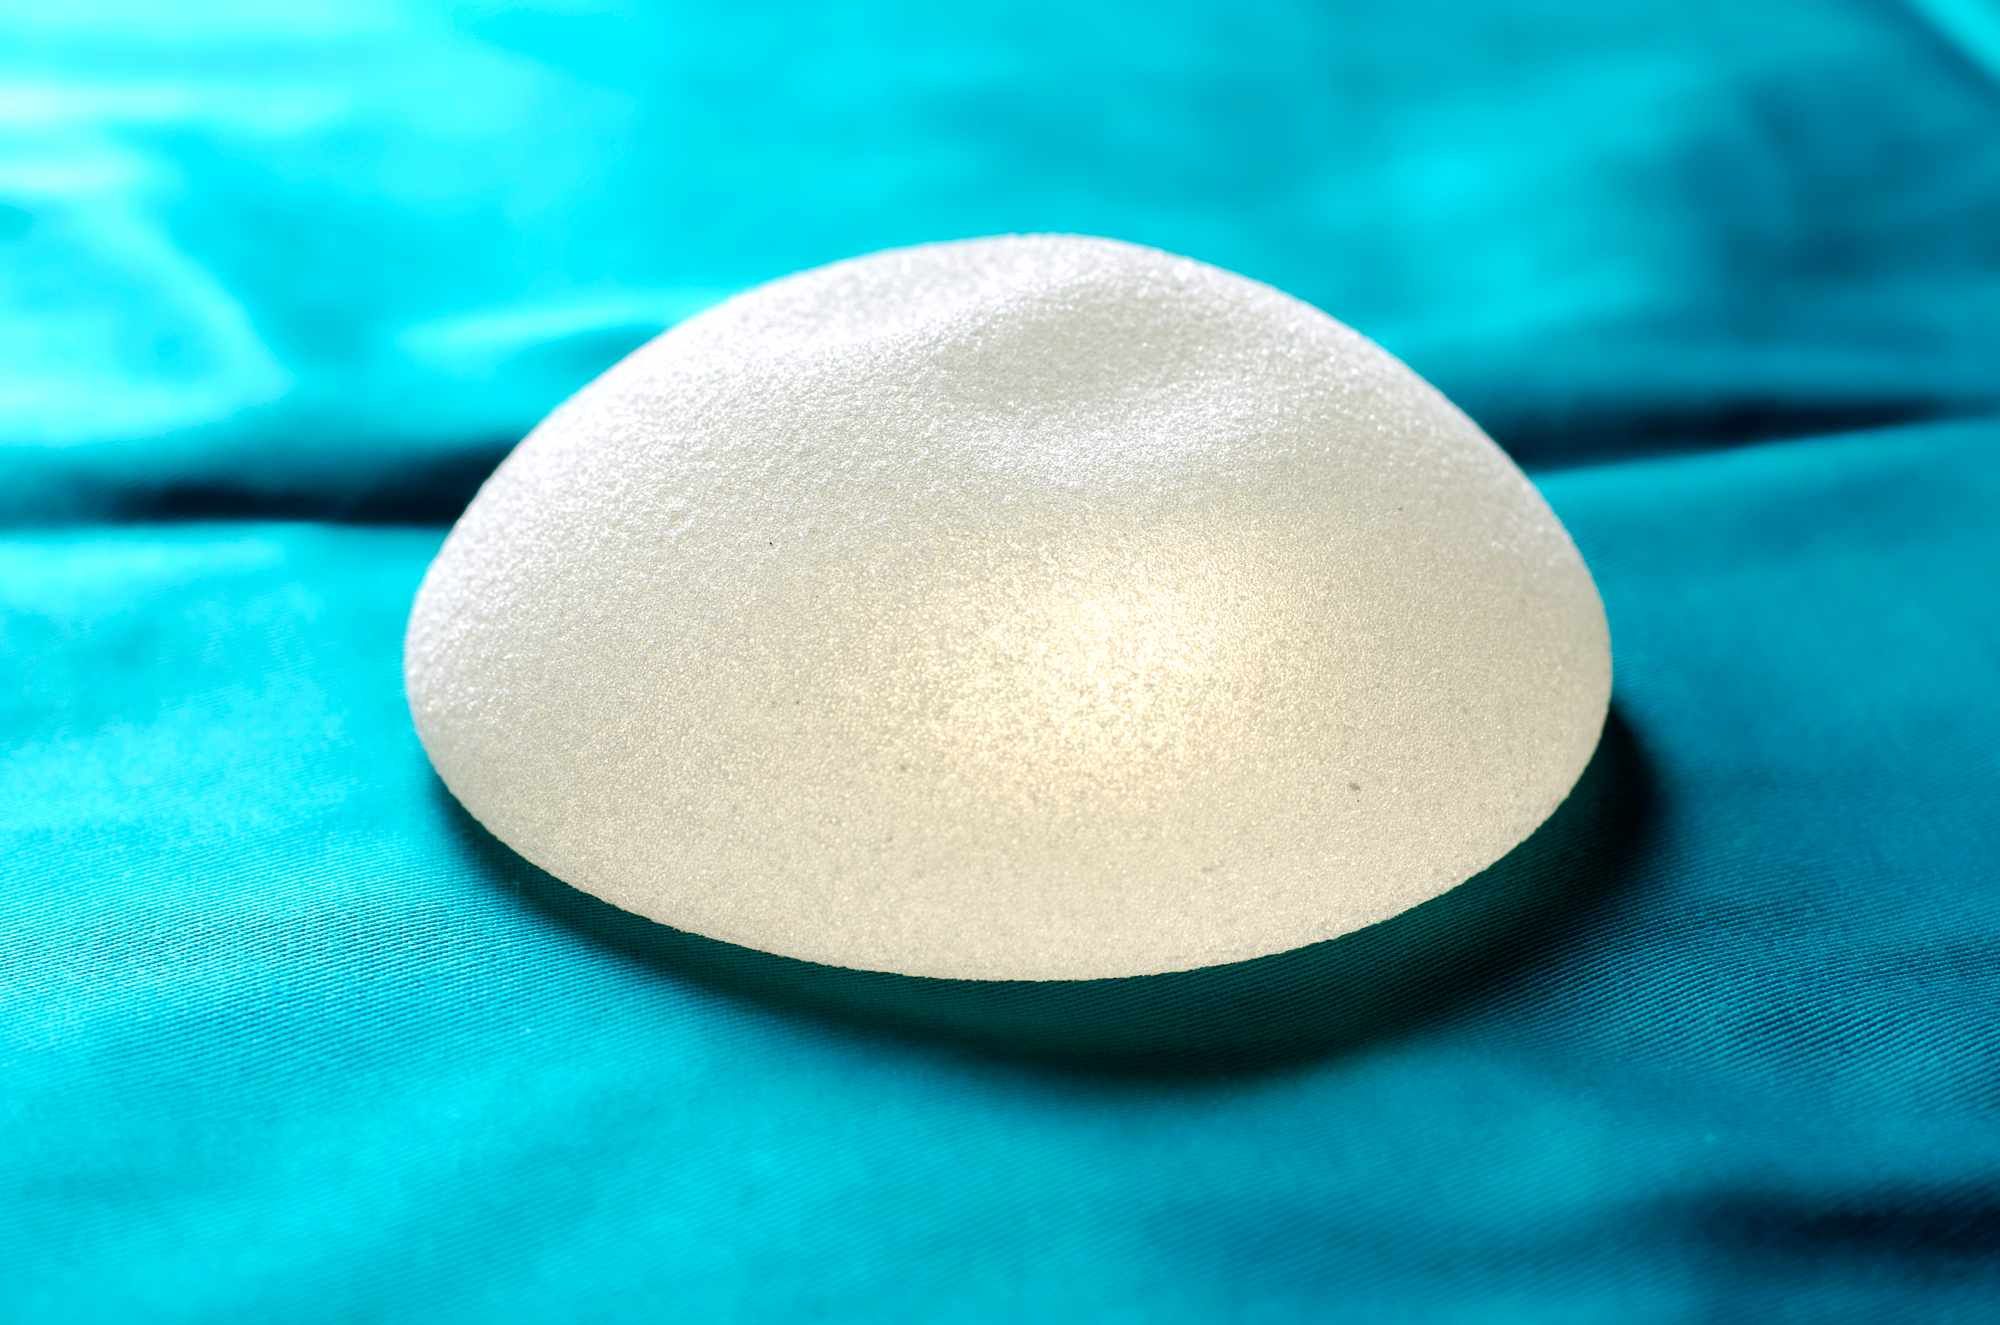 How the surfaces of silicone breast implants affect the immune